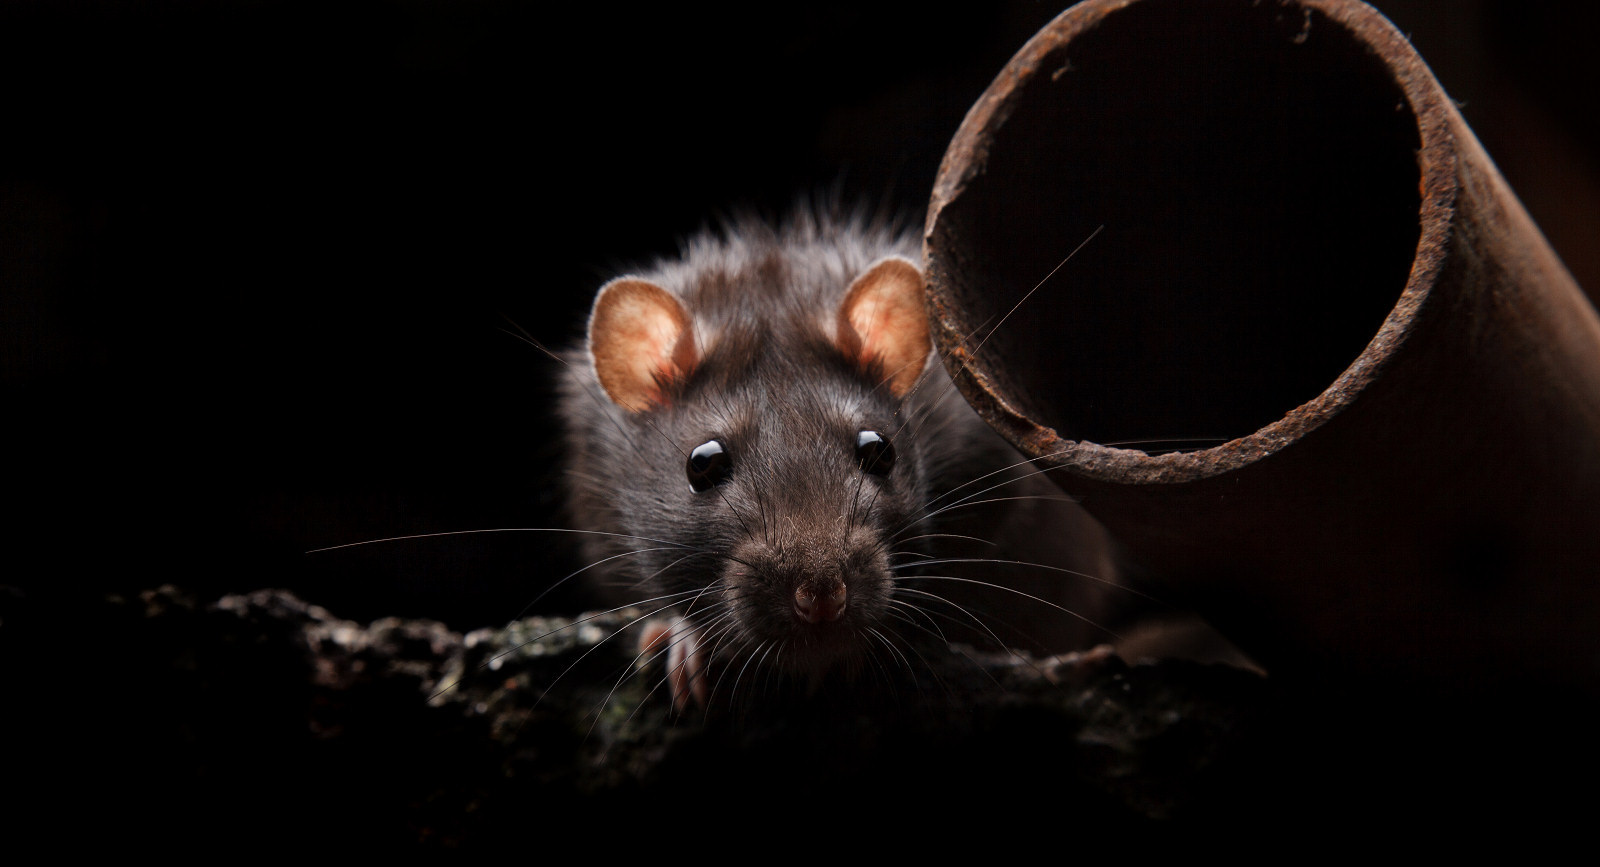 Rat in the dark illustrating Alpha pest control in Llanelli, South Wales